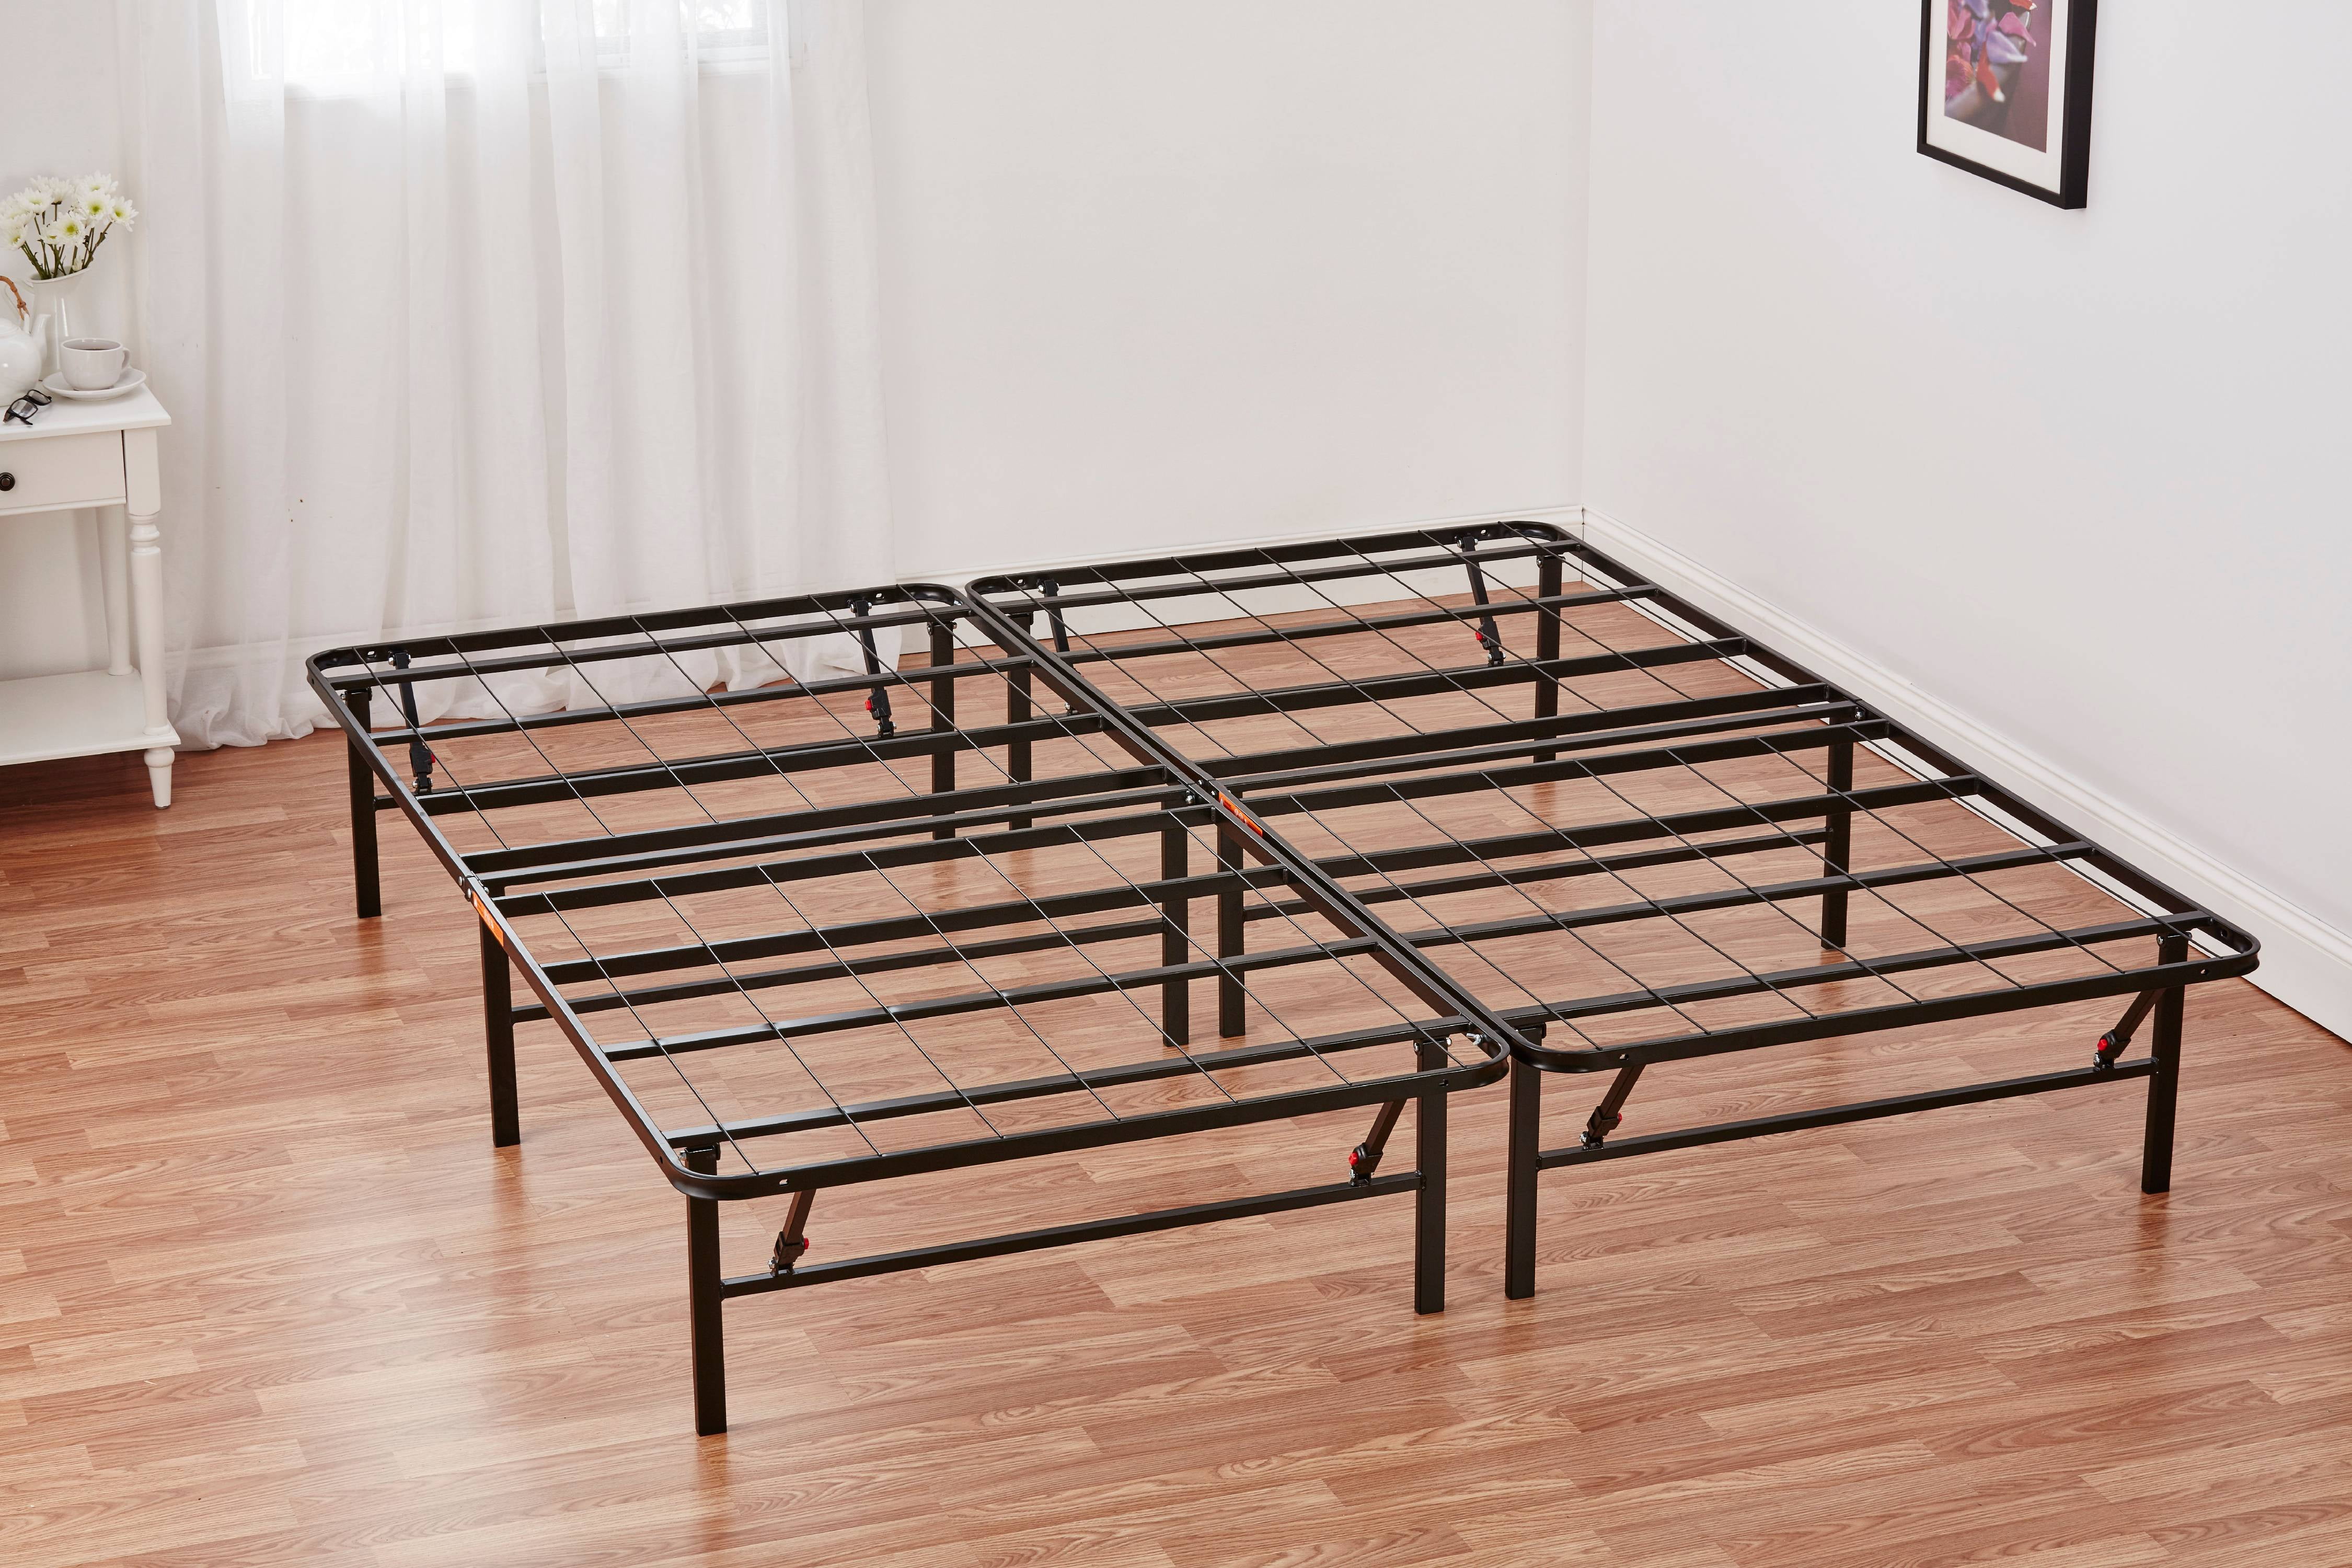 Mainstays 14" High Profile Foldable Steel Bed Frame Powder-coated Steel Full 